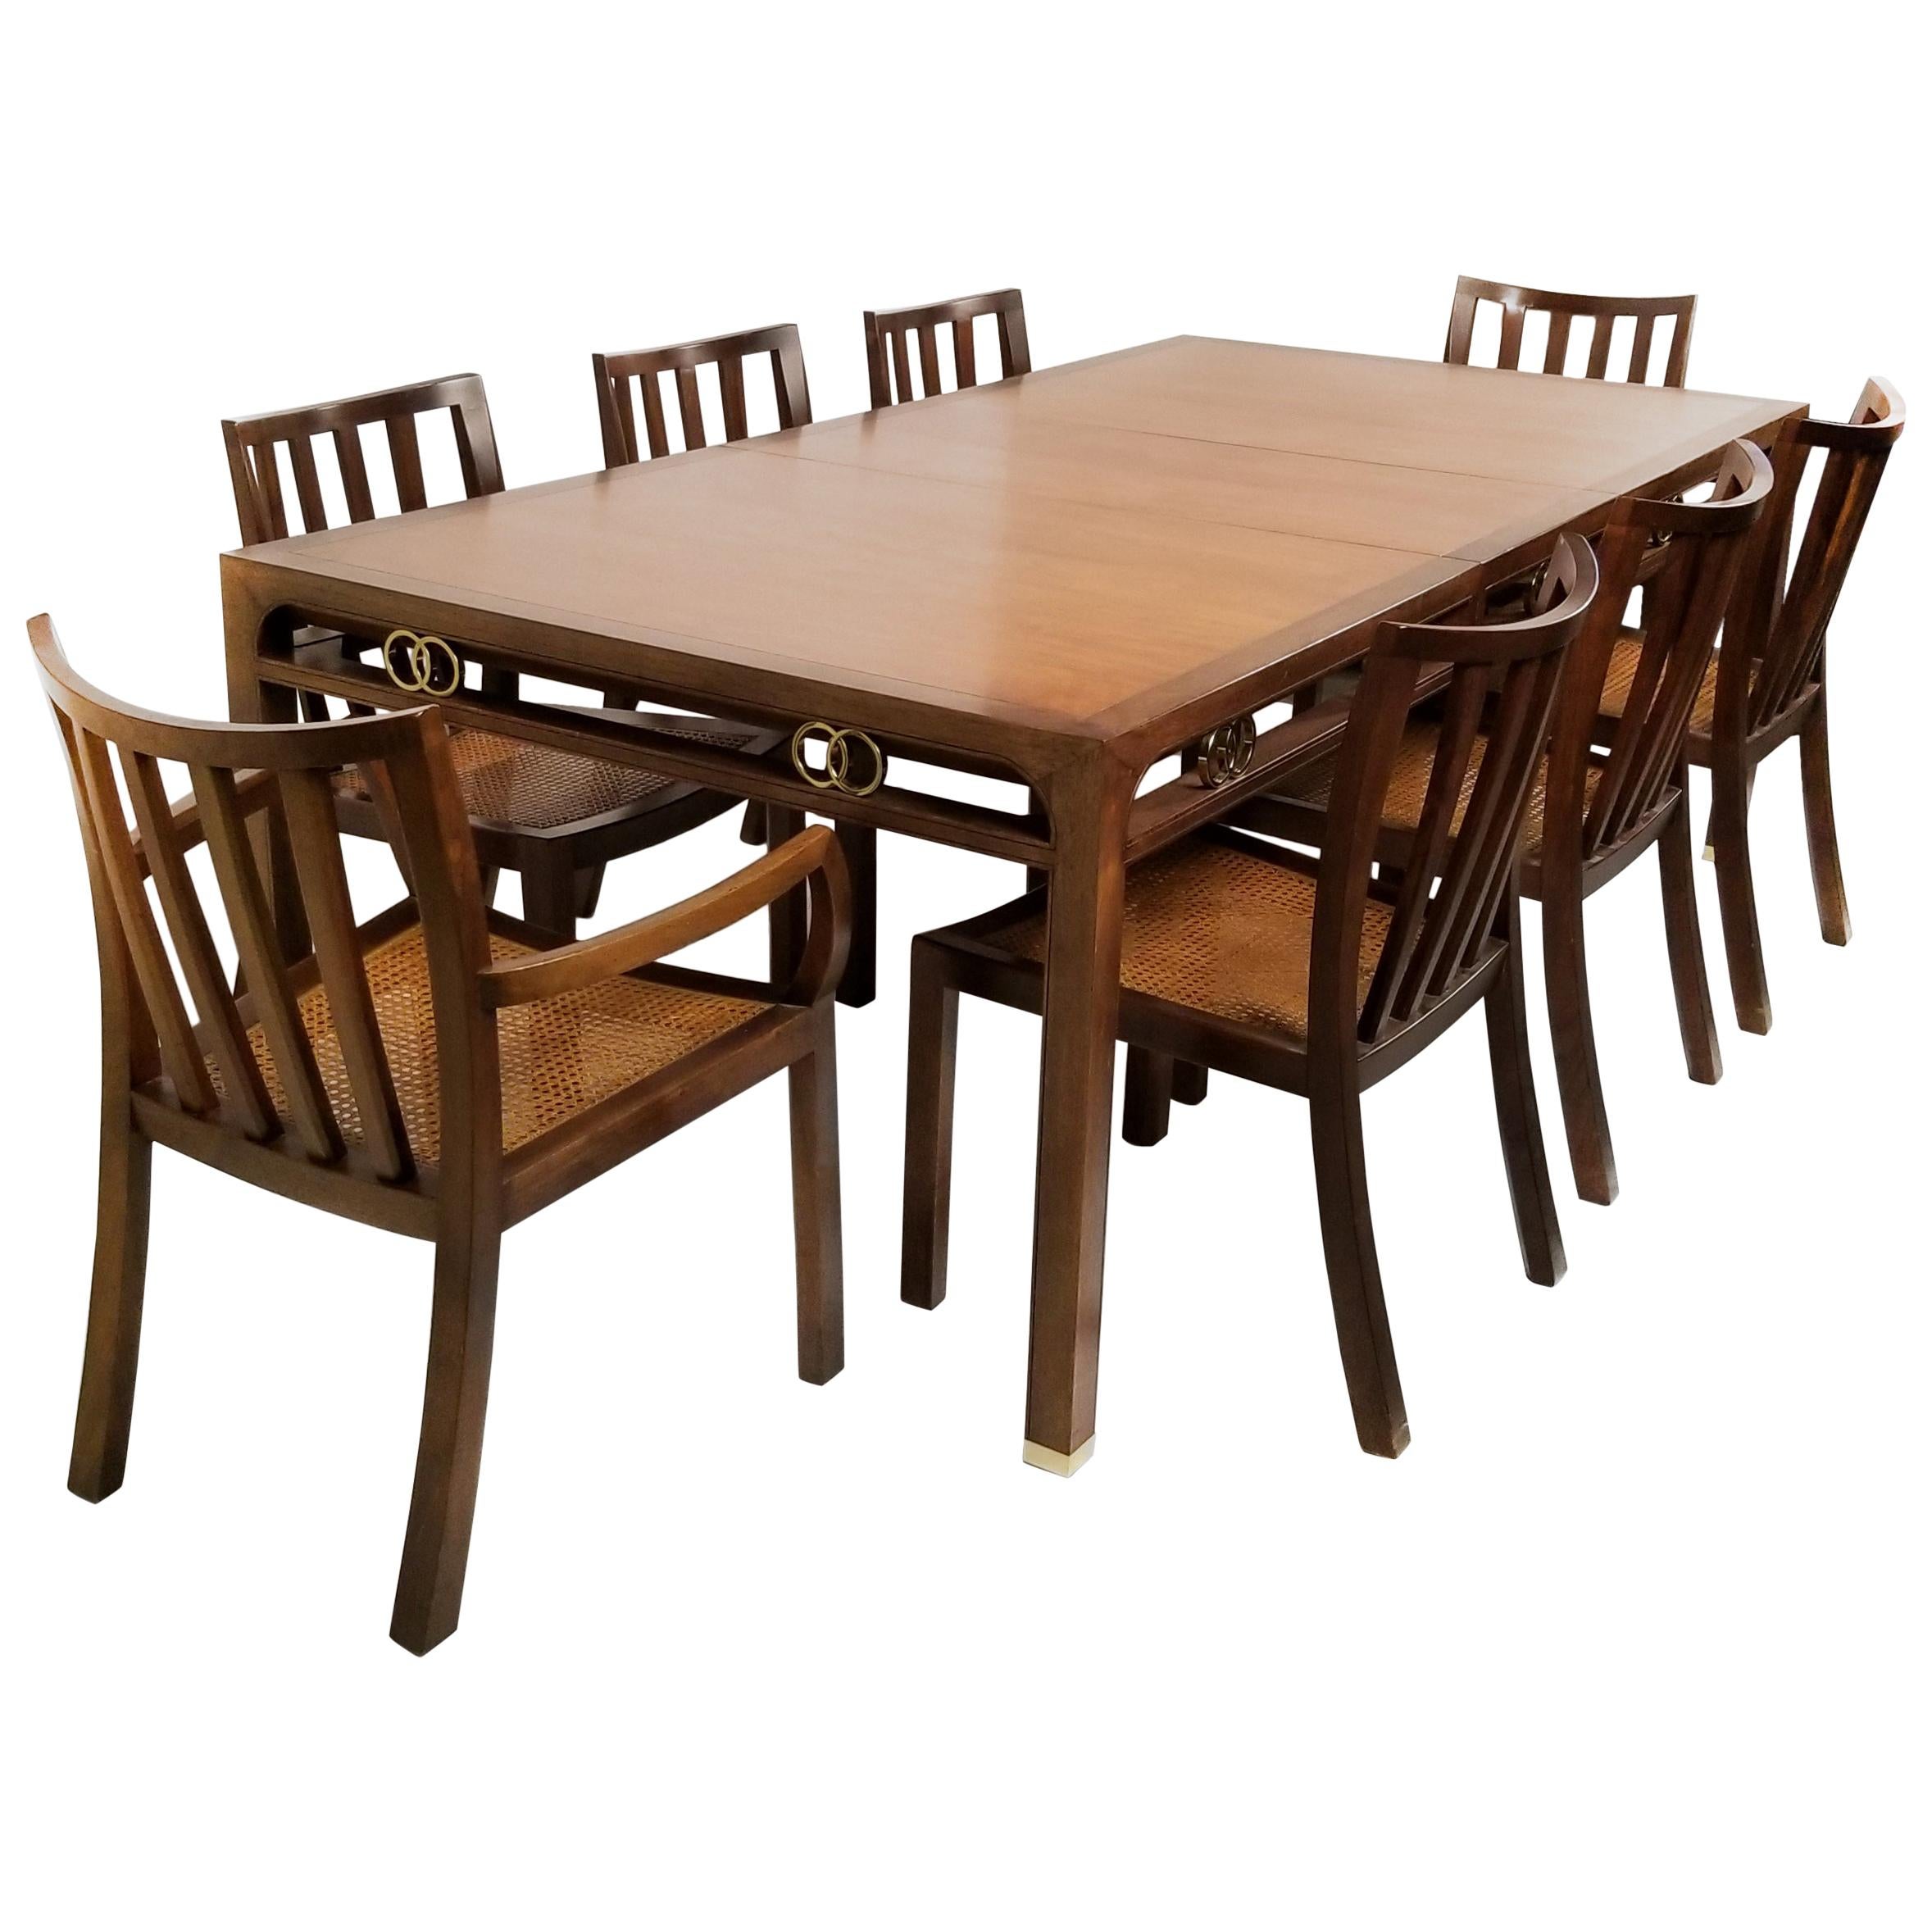 1960s Baker Far East Collection Dining Room Table and Chairs by Michael Taylor